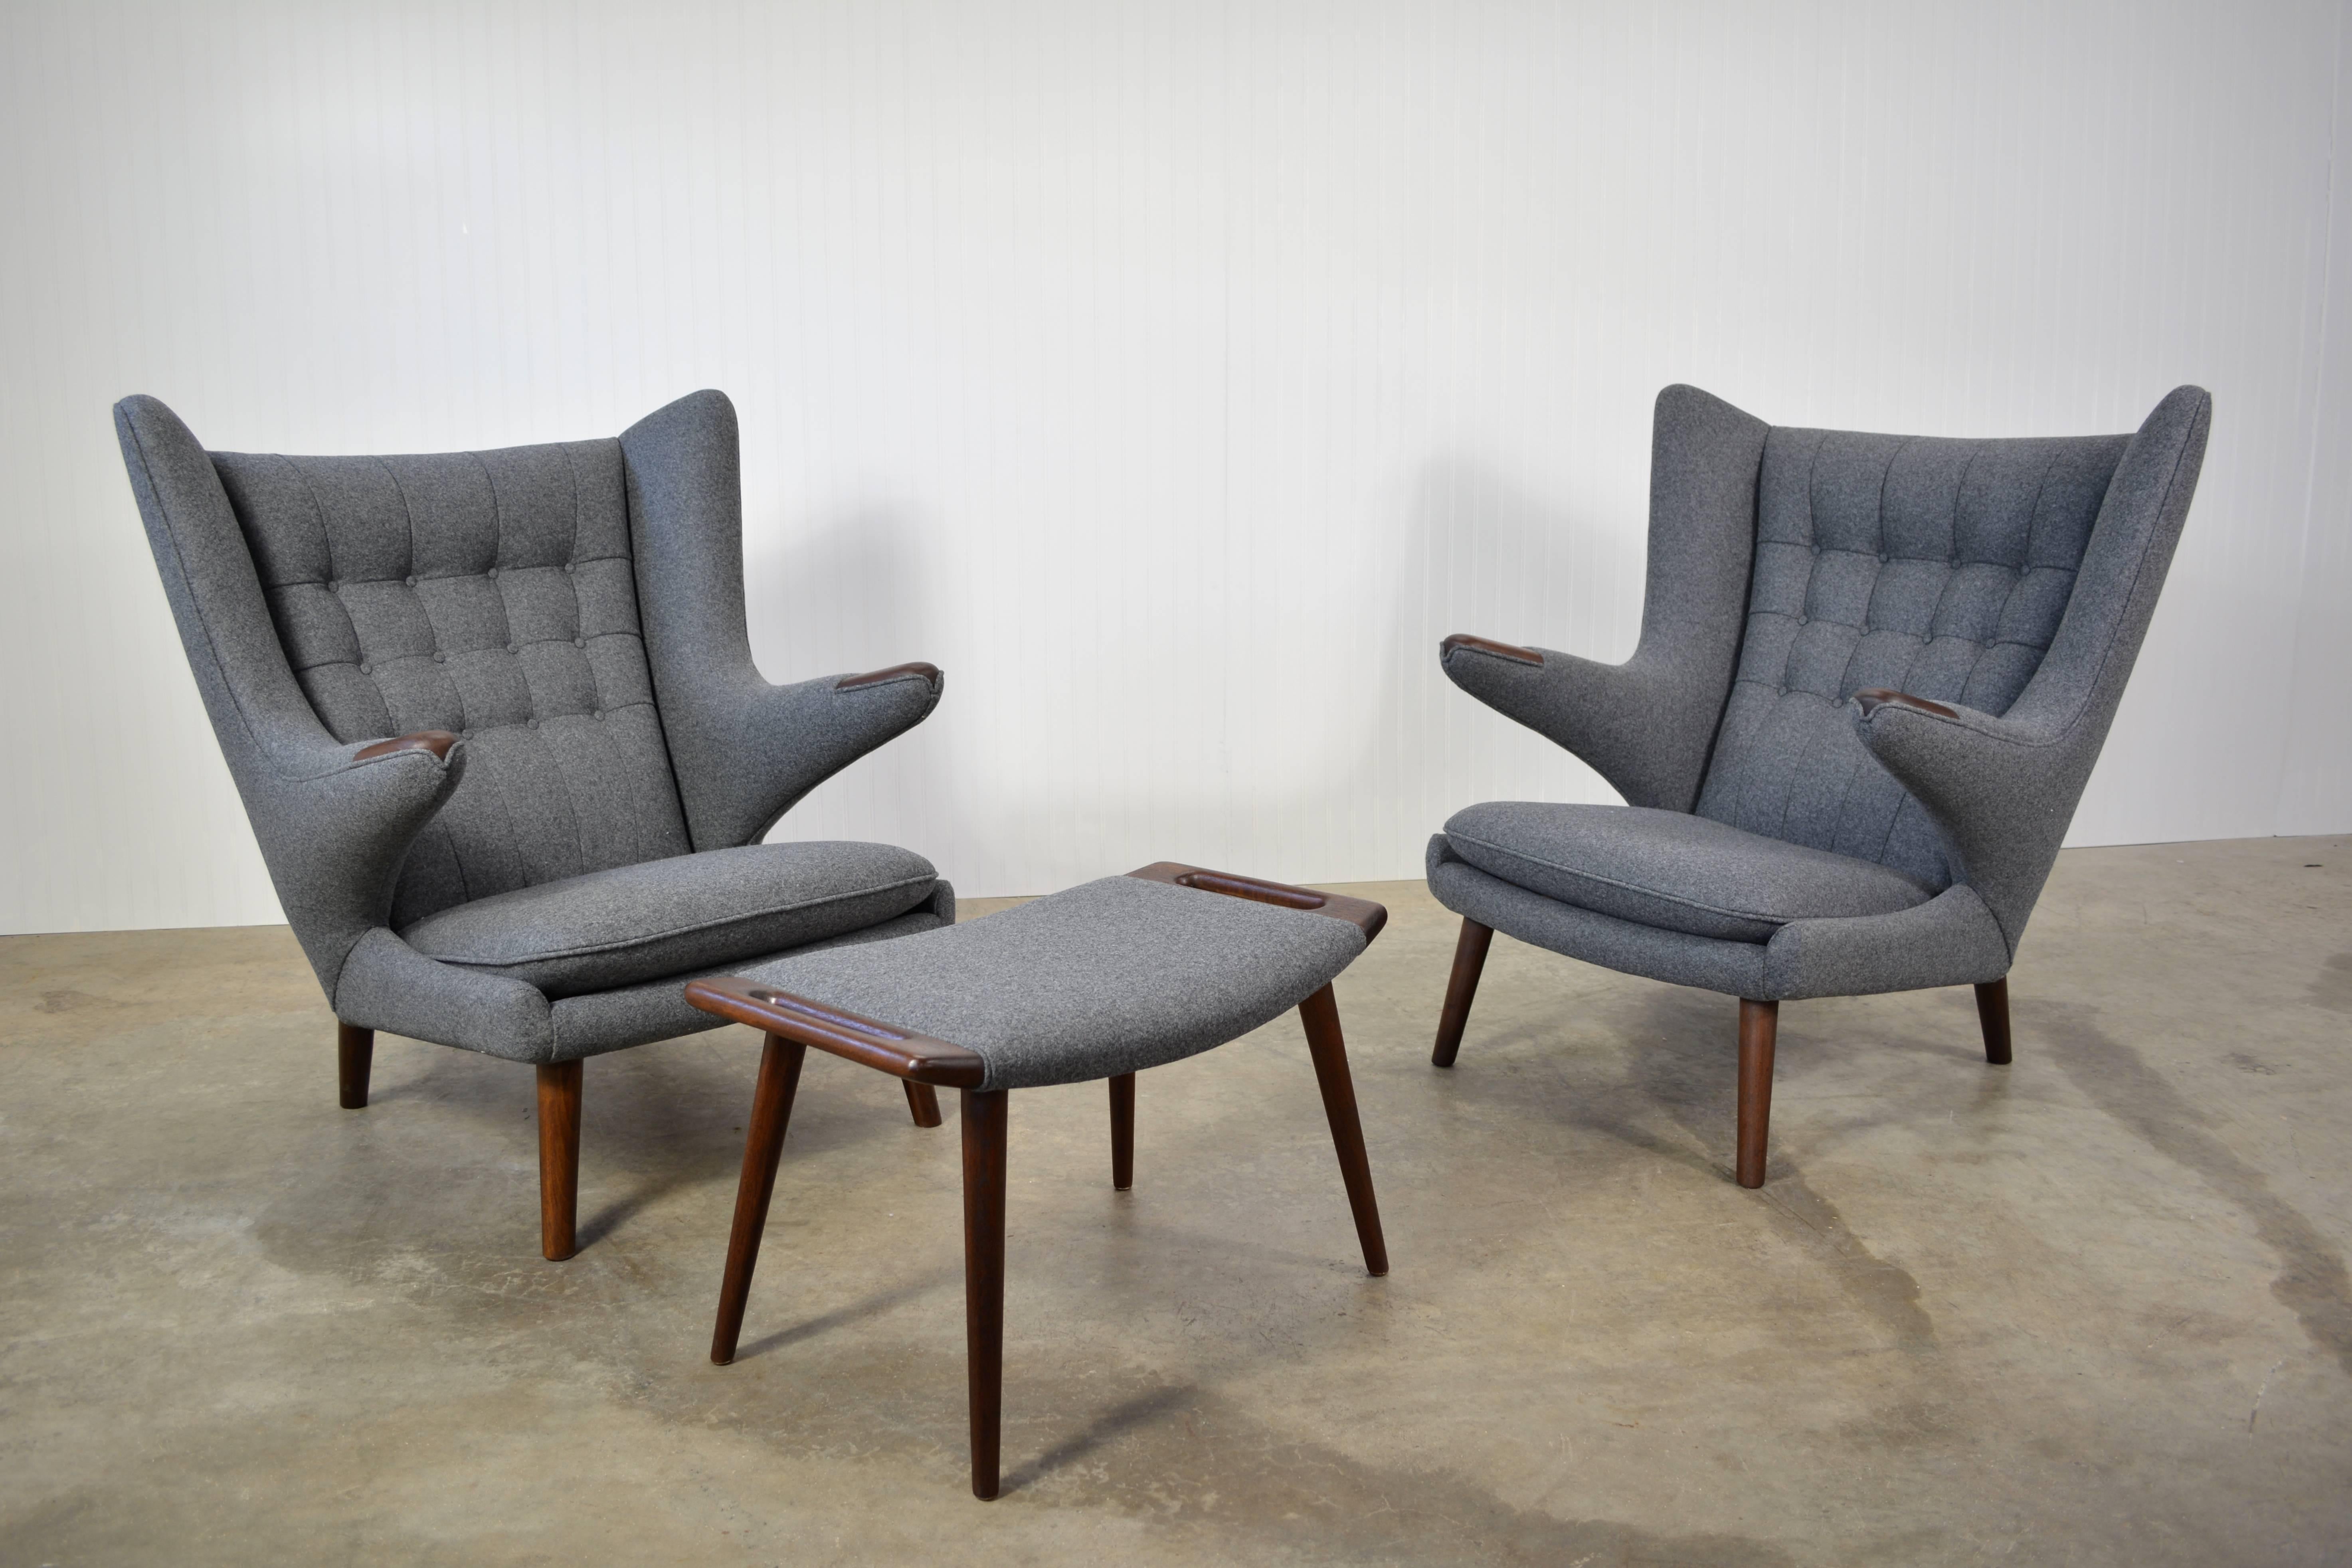 A pair of Hans Wegner "Papa Bear" chairs designed in 1951. Newly restored and recovered in Maharam "Divina Melange". Teak legs and paws. A single matching ottoman is included.